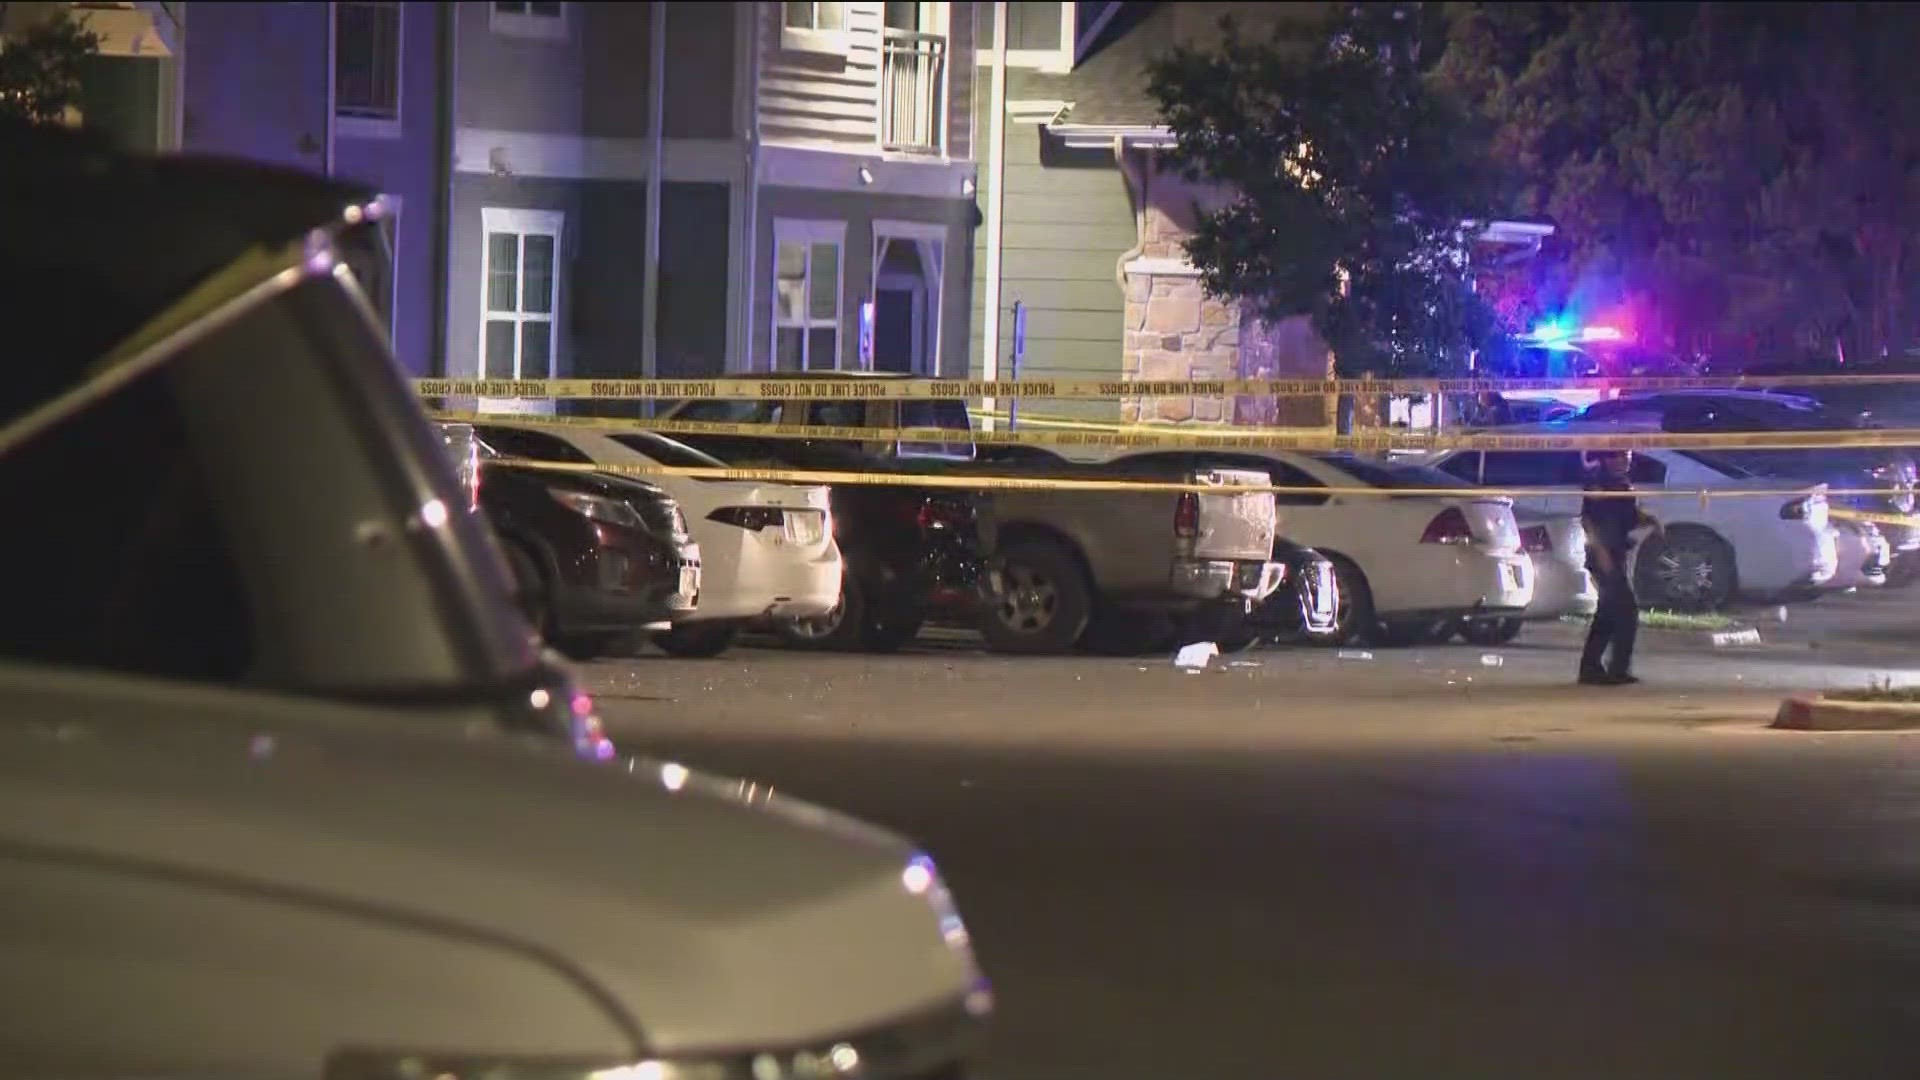 A teen girl is in the hospital following a shooting at an apartment complex in northeast Austin, according to police. KVUE's Eric Pointer has the latest.